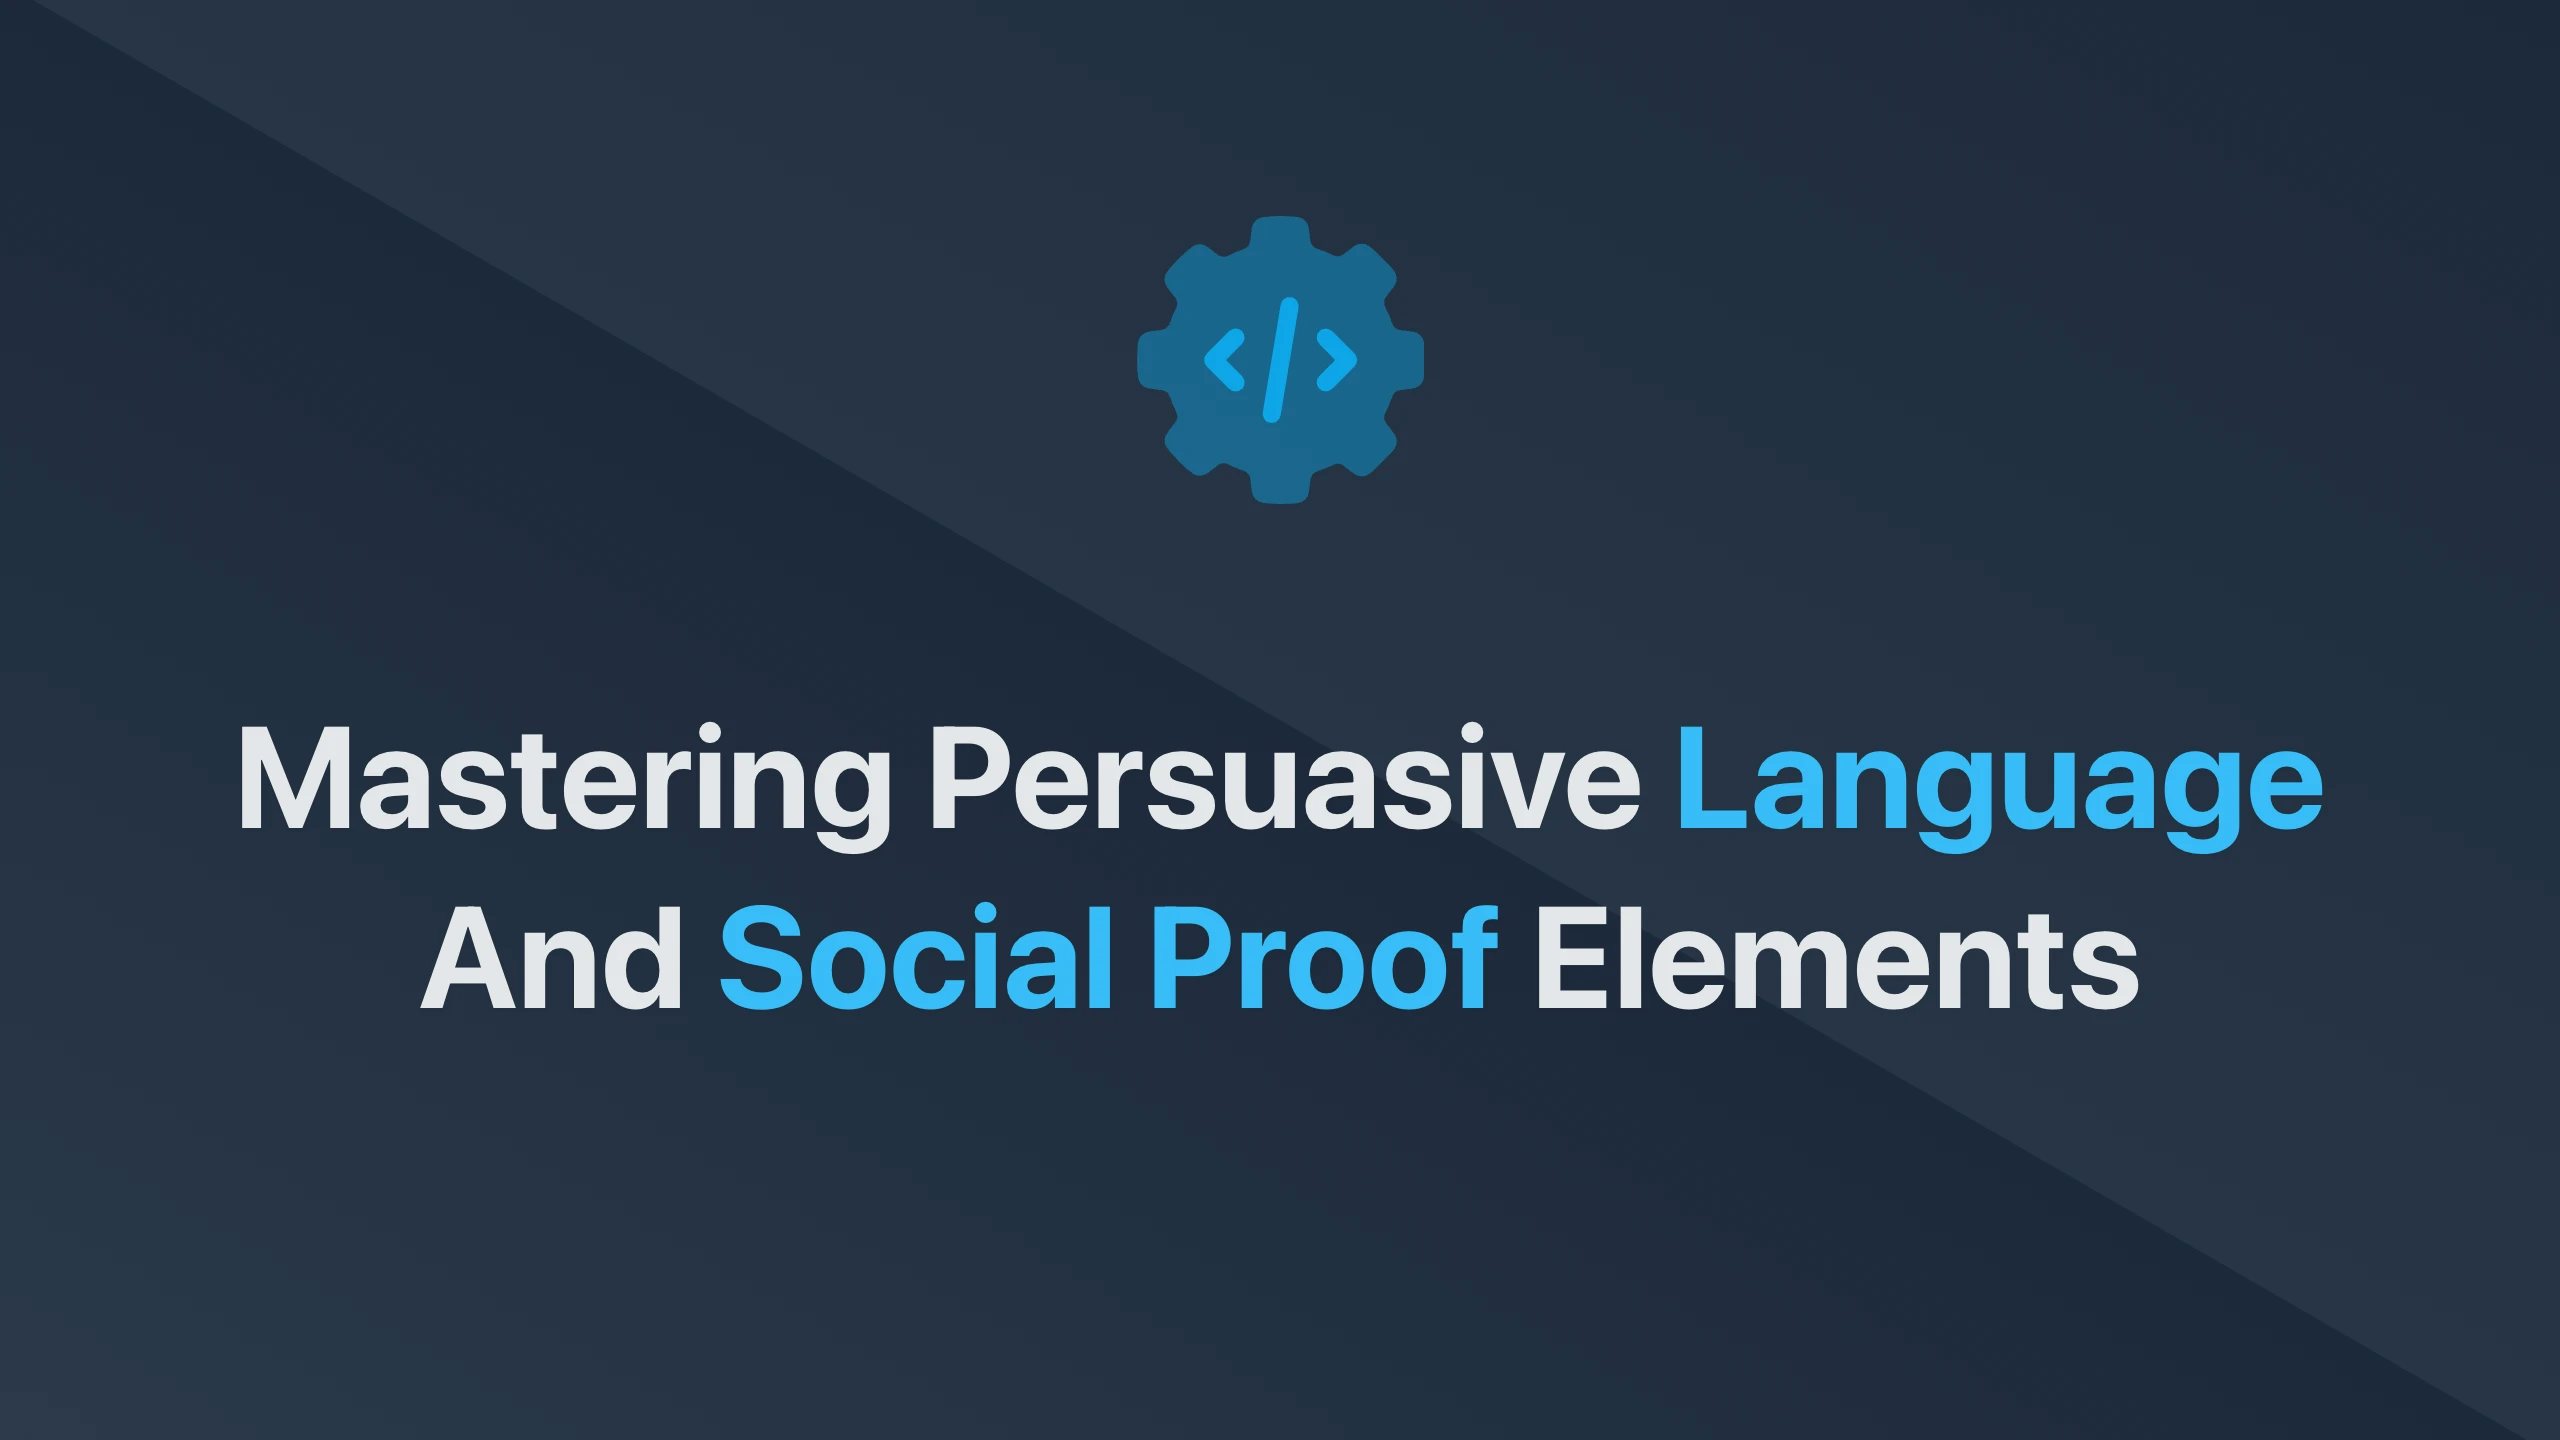 Cover Image for Mastering Persuasive Language and Social Proof Elements